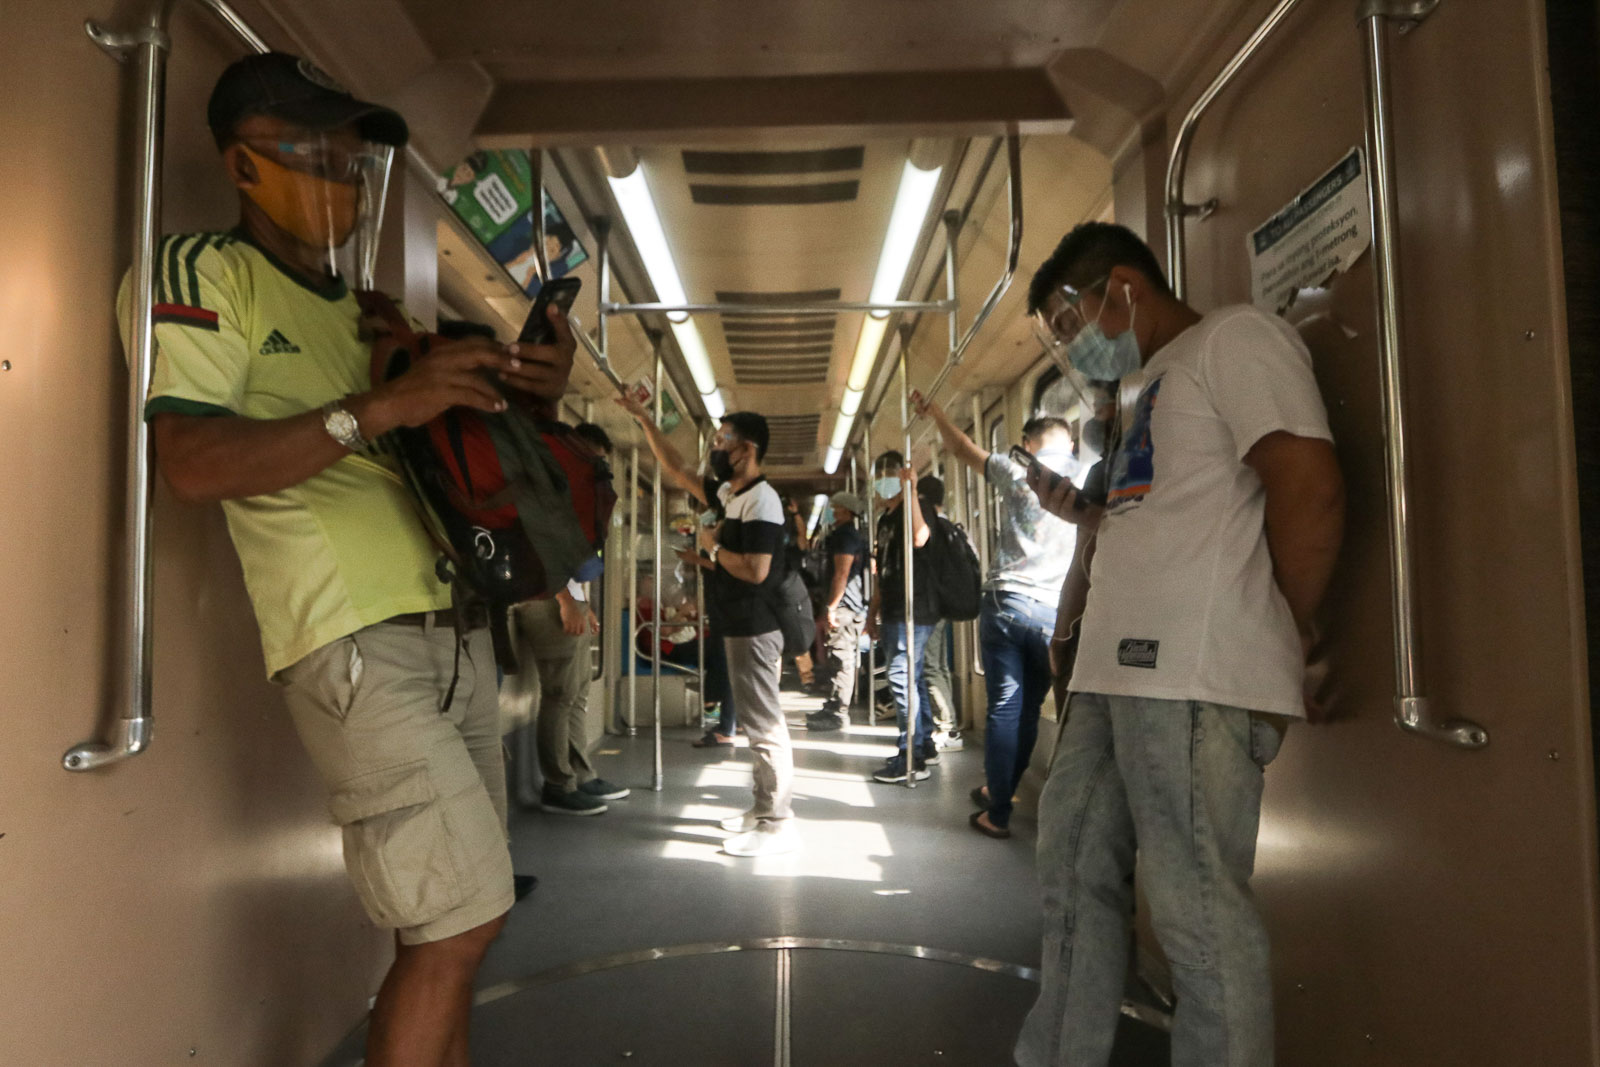 LRT commuters reduced social distancing